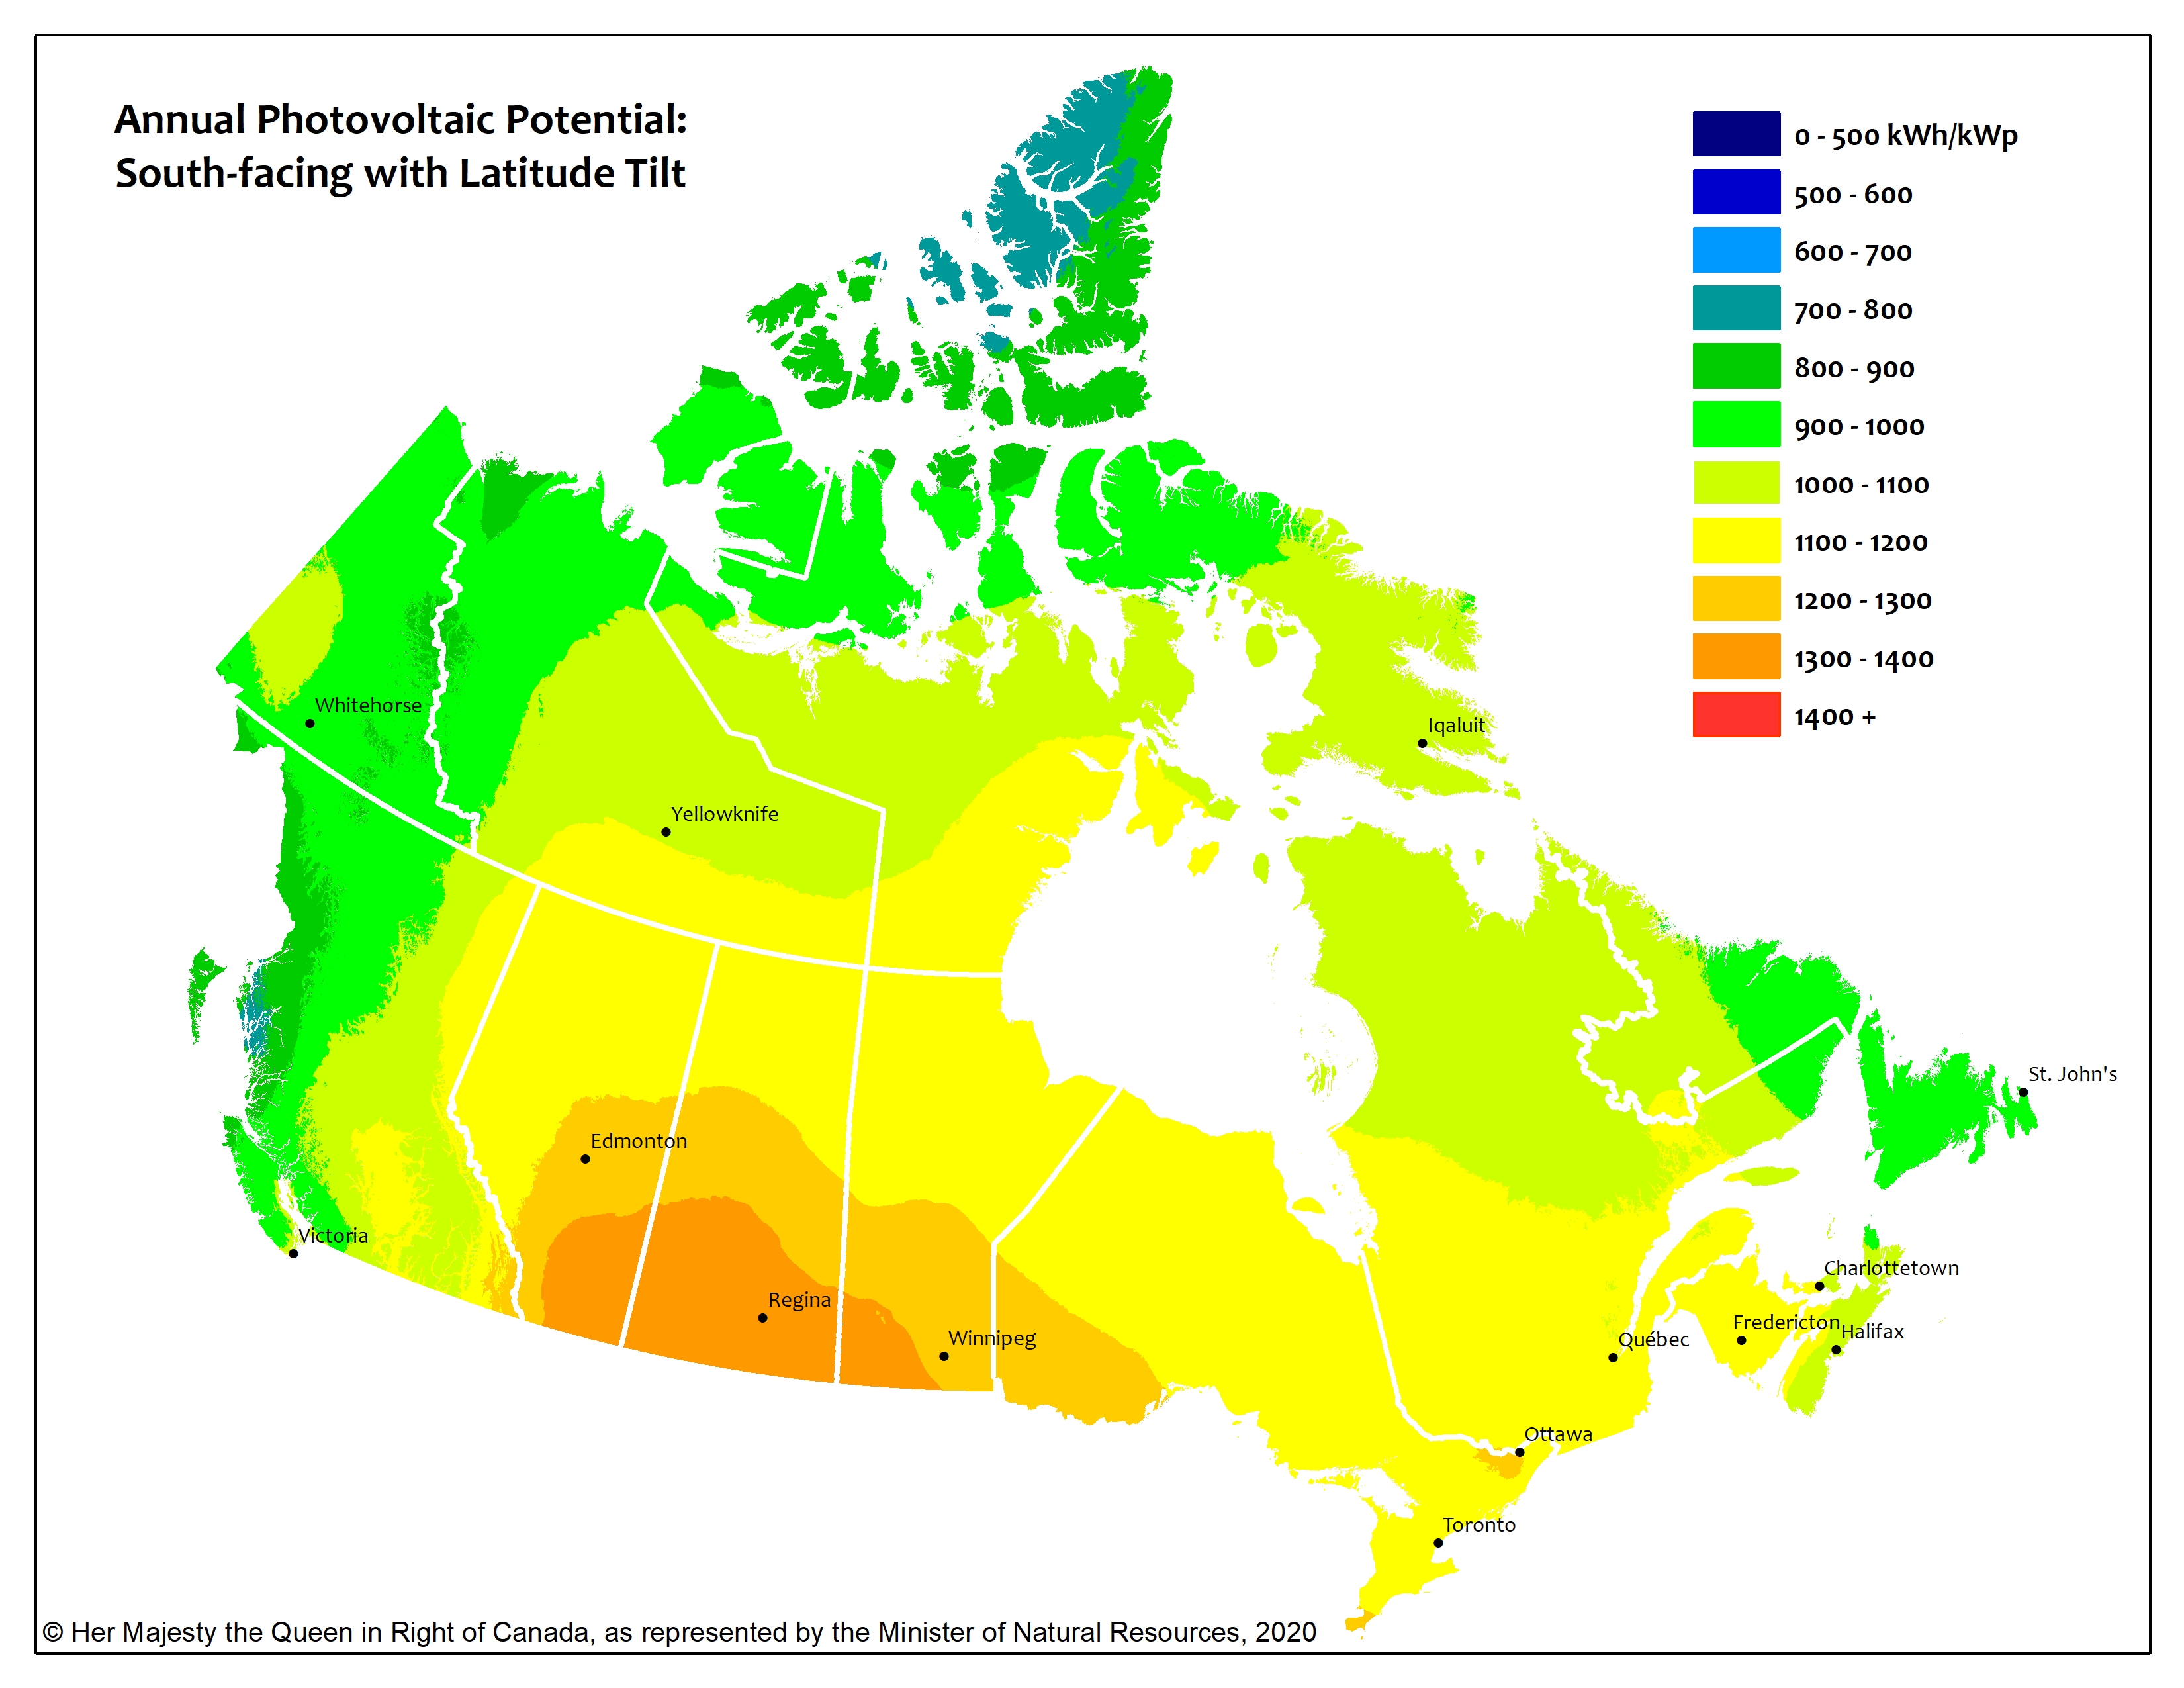 Photovoltaic potential and solar resource map of Canada